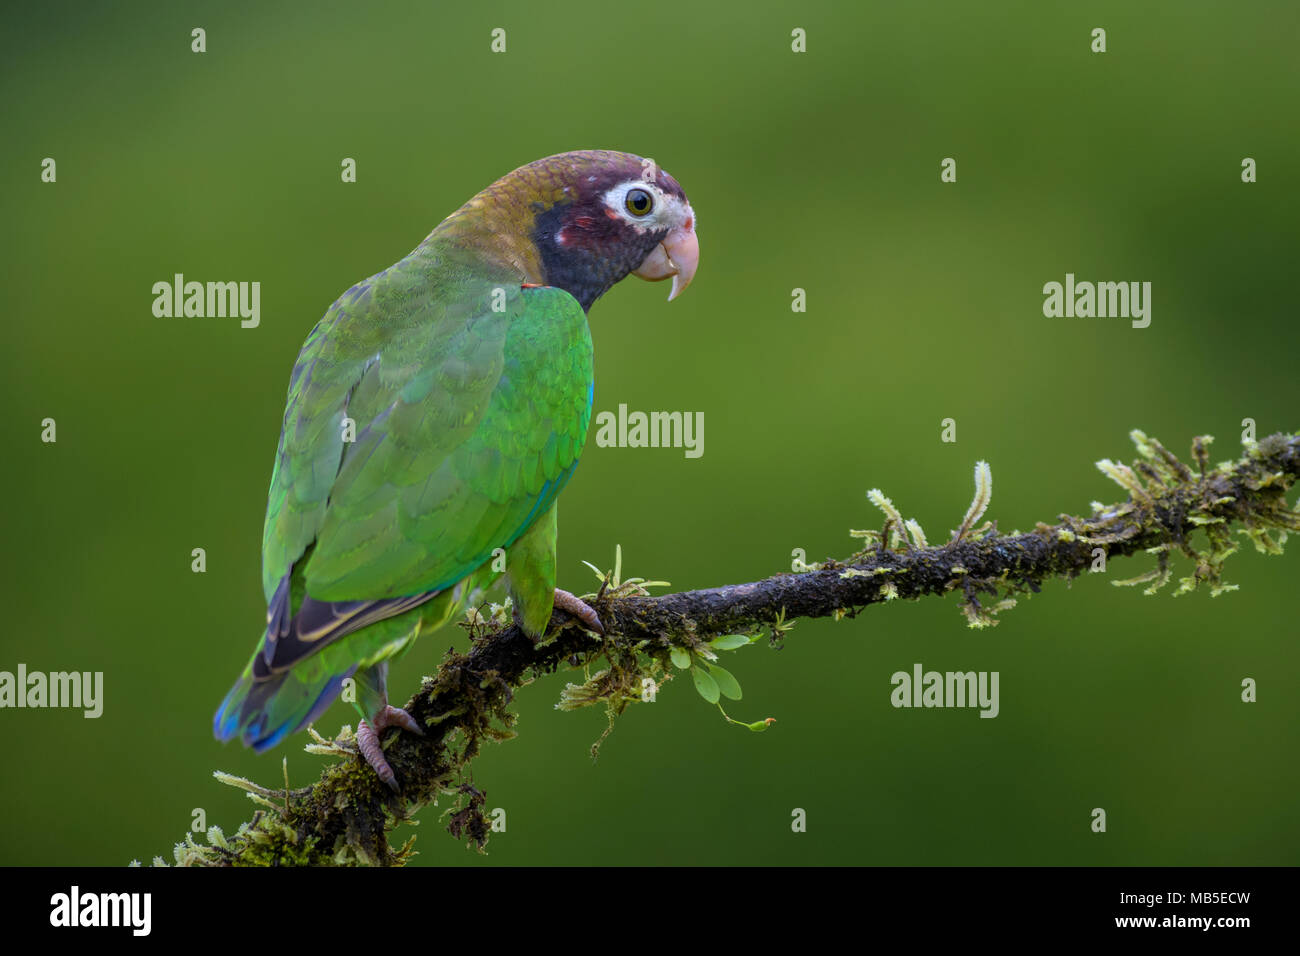 Brown-hooded Parrot - Pyrilia haematotis, beatiful colorful parrot from Central America forest Costa Rica. Stock Photo